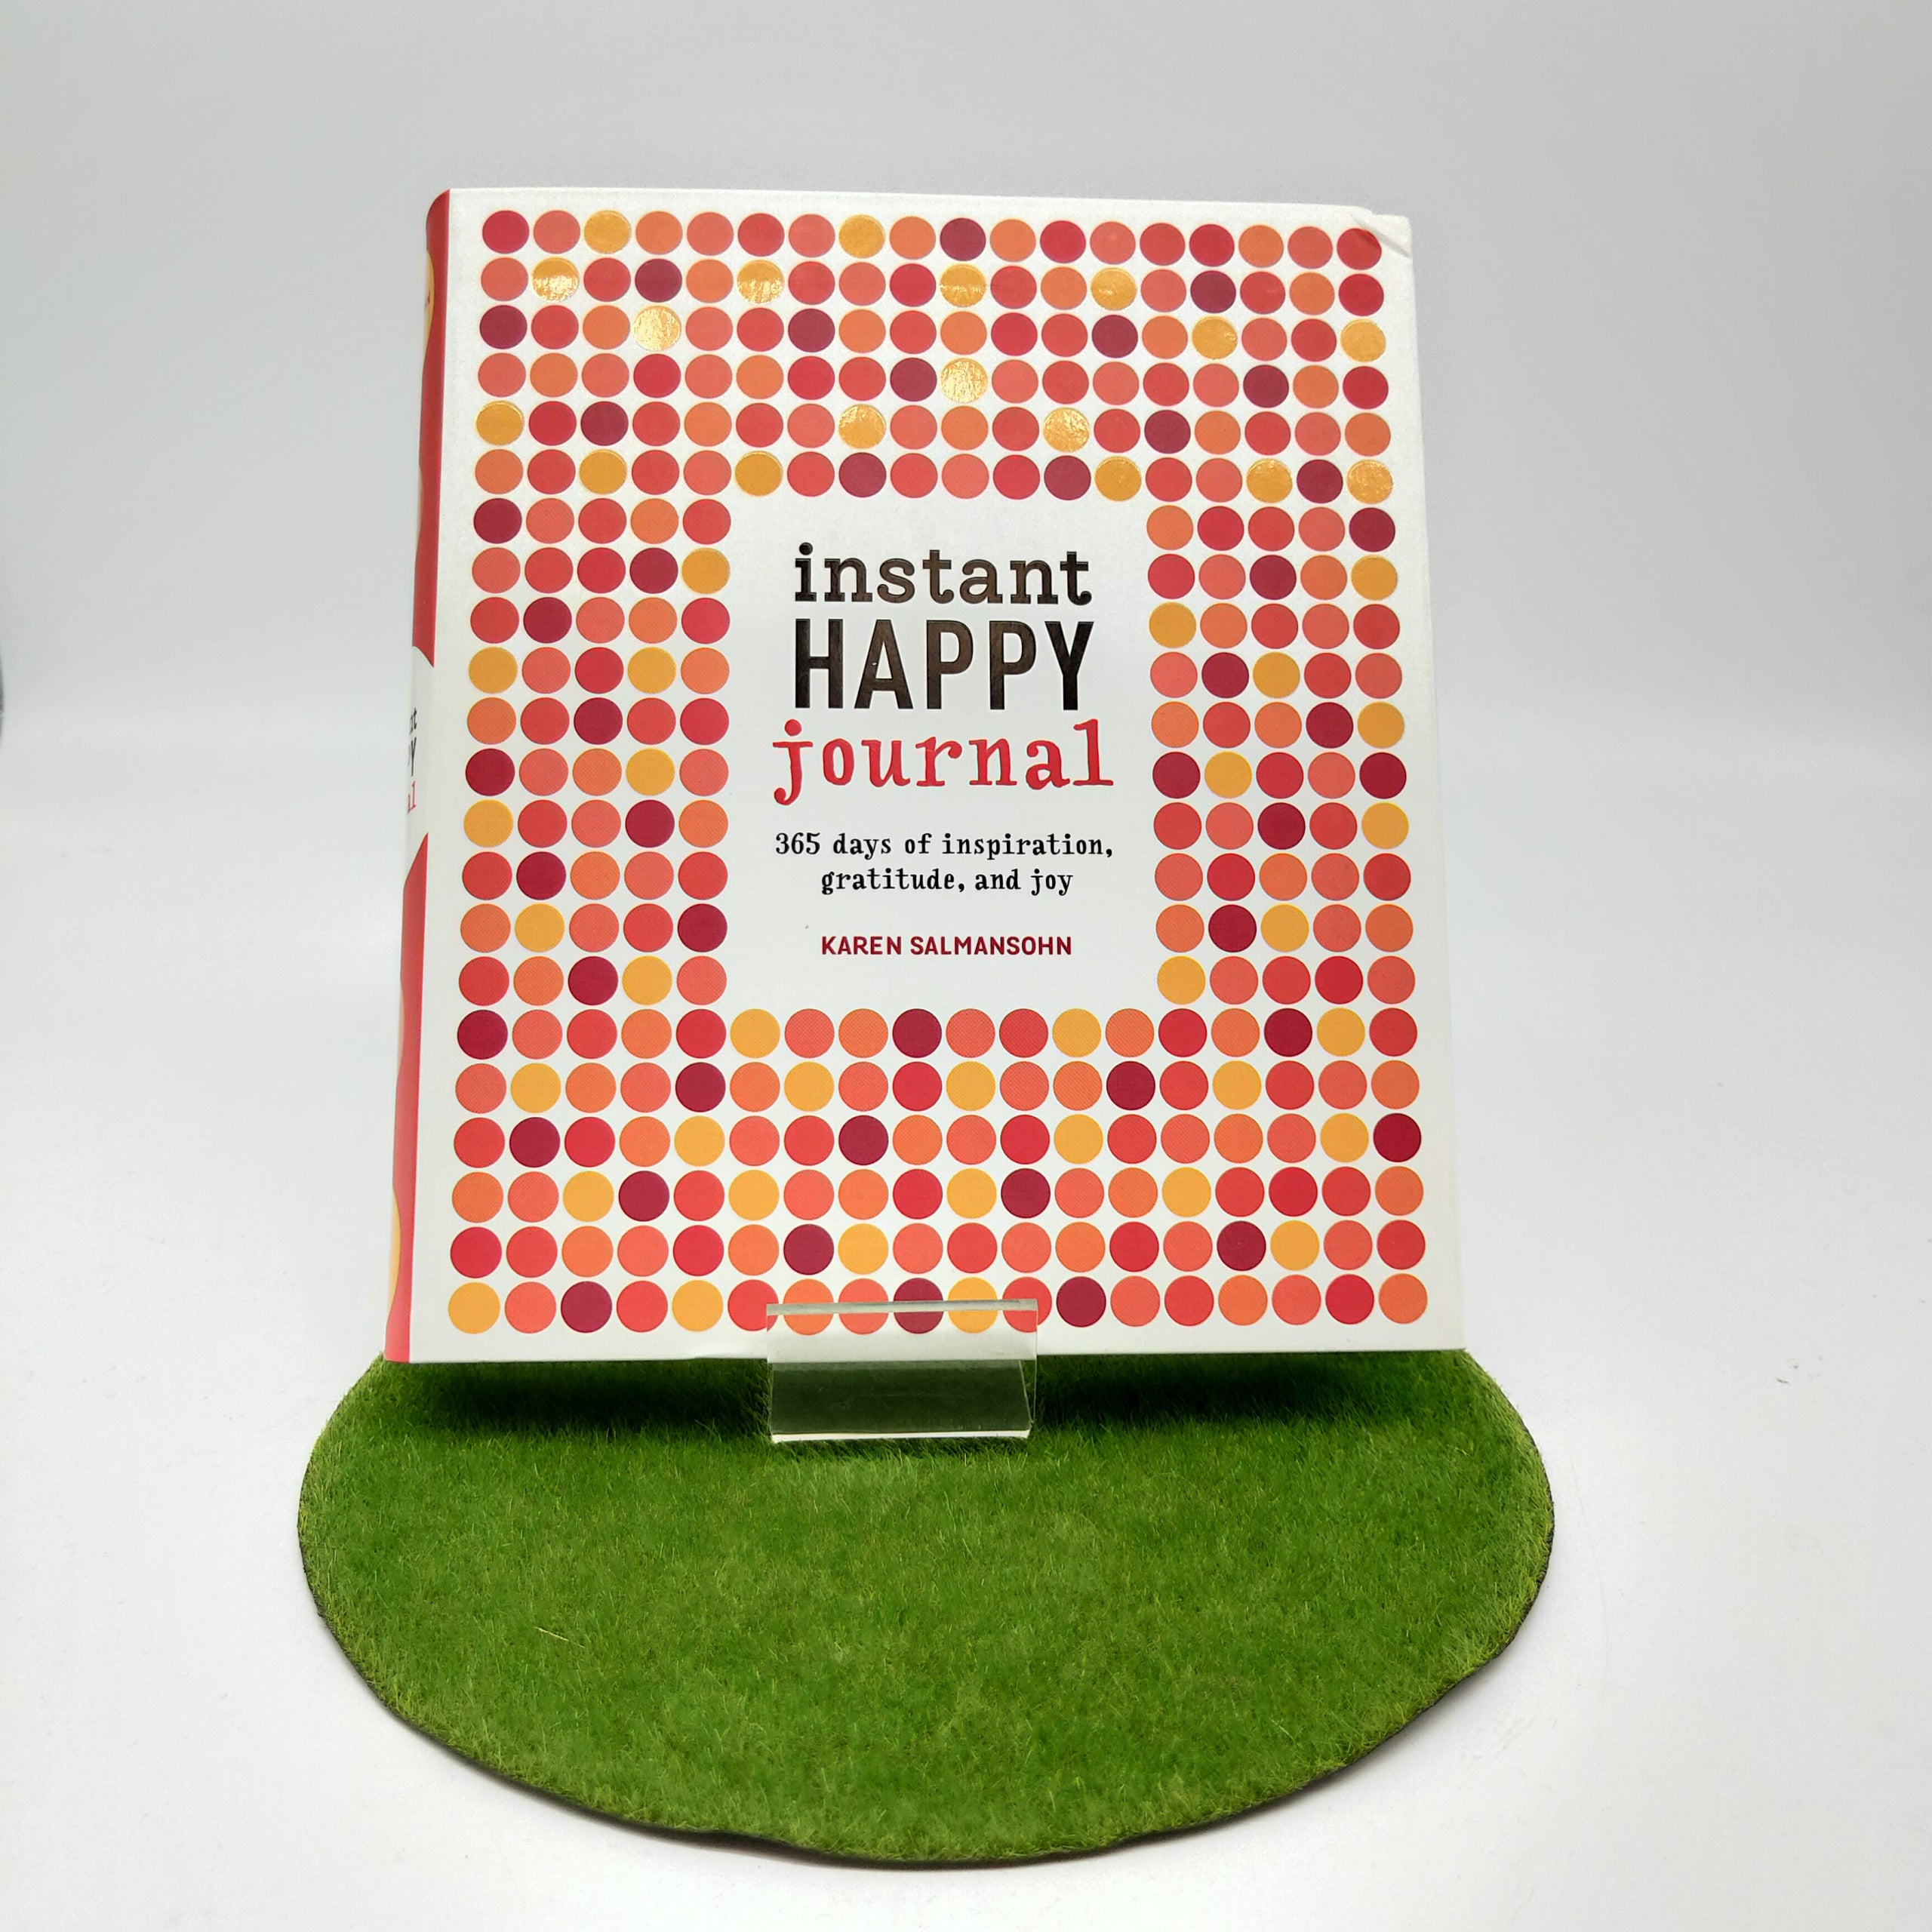 The Instant Happy Journal